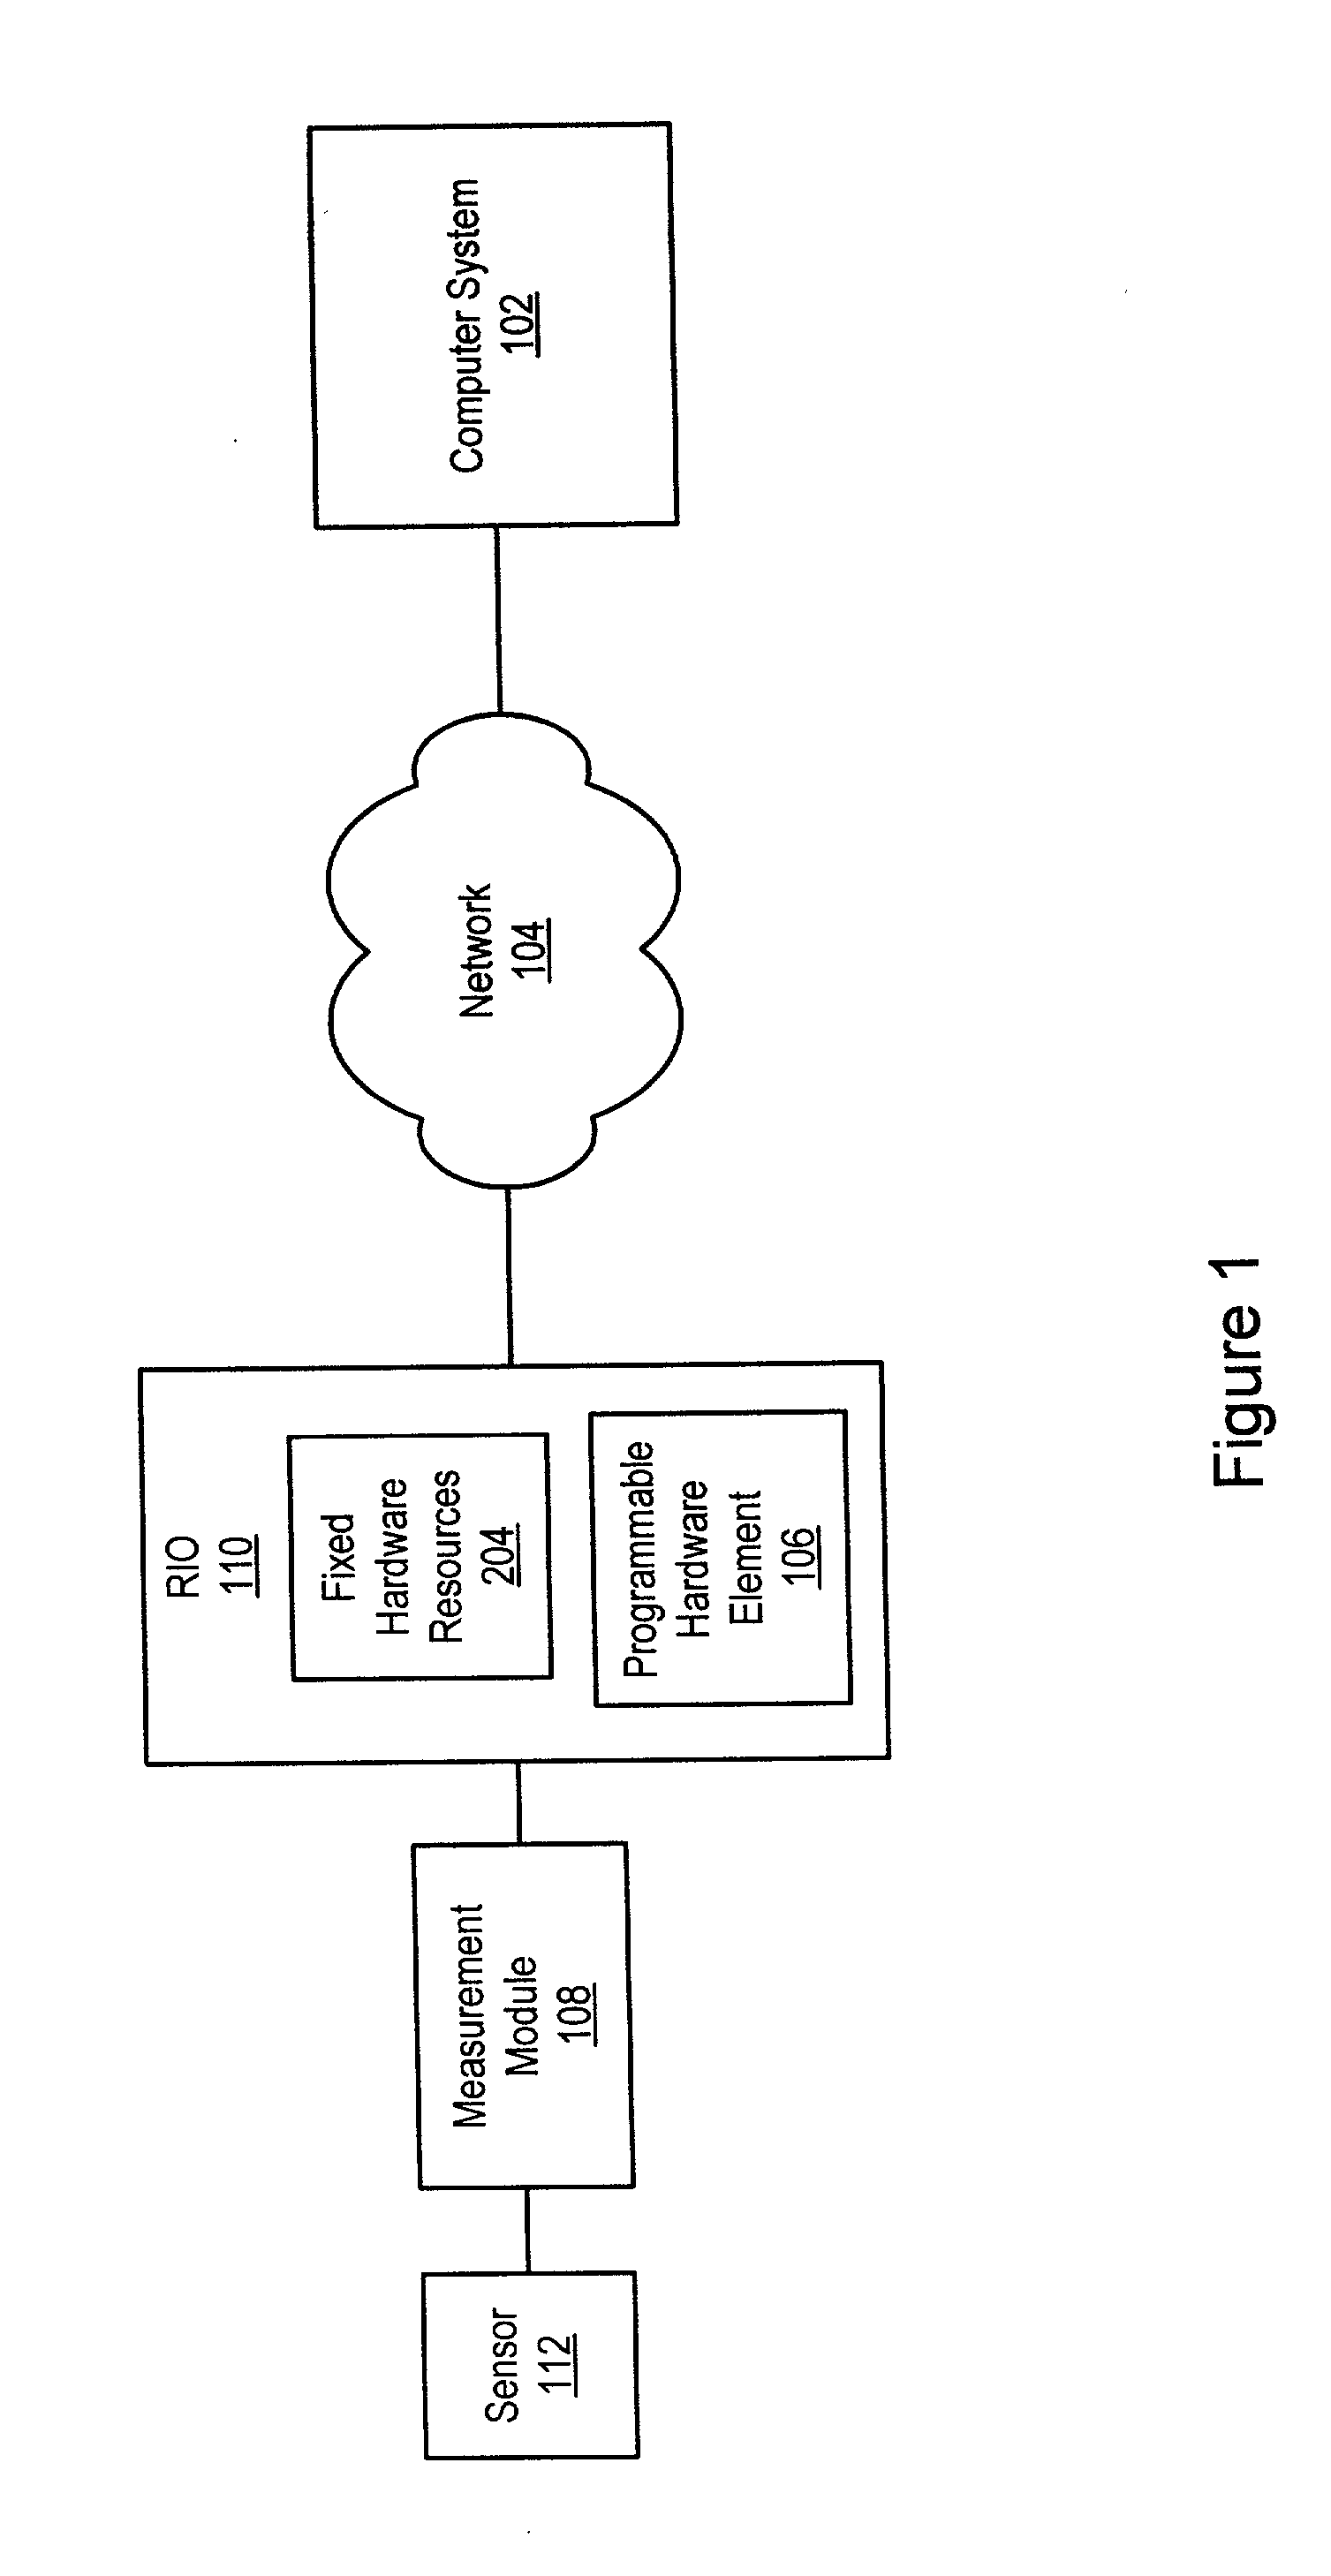 Reconfigurable measurement system utilizing a programmable hardware element and fixed hardware resources